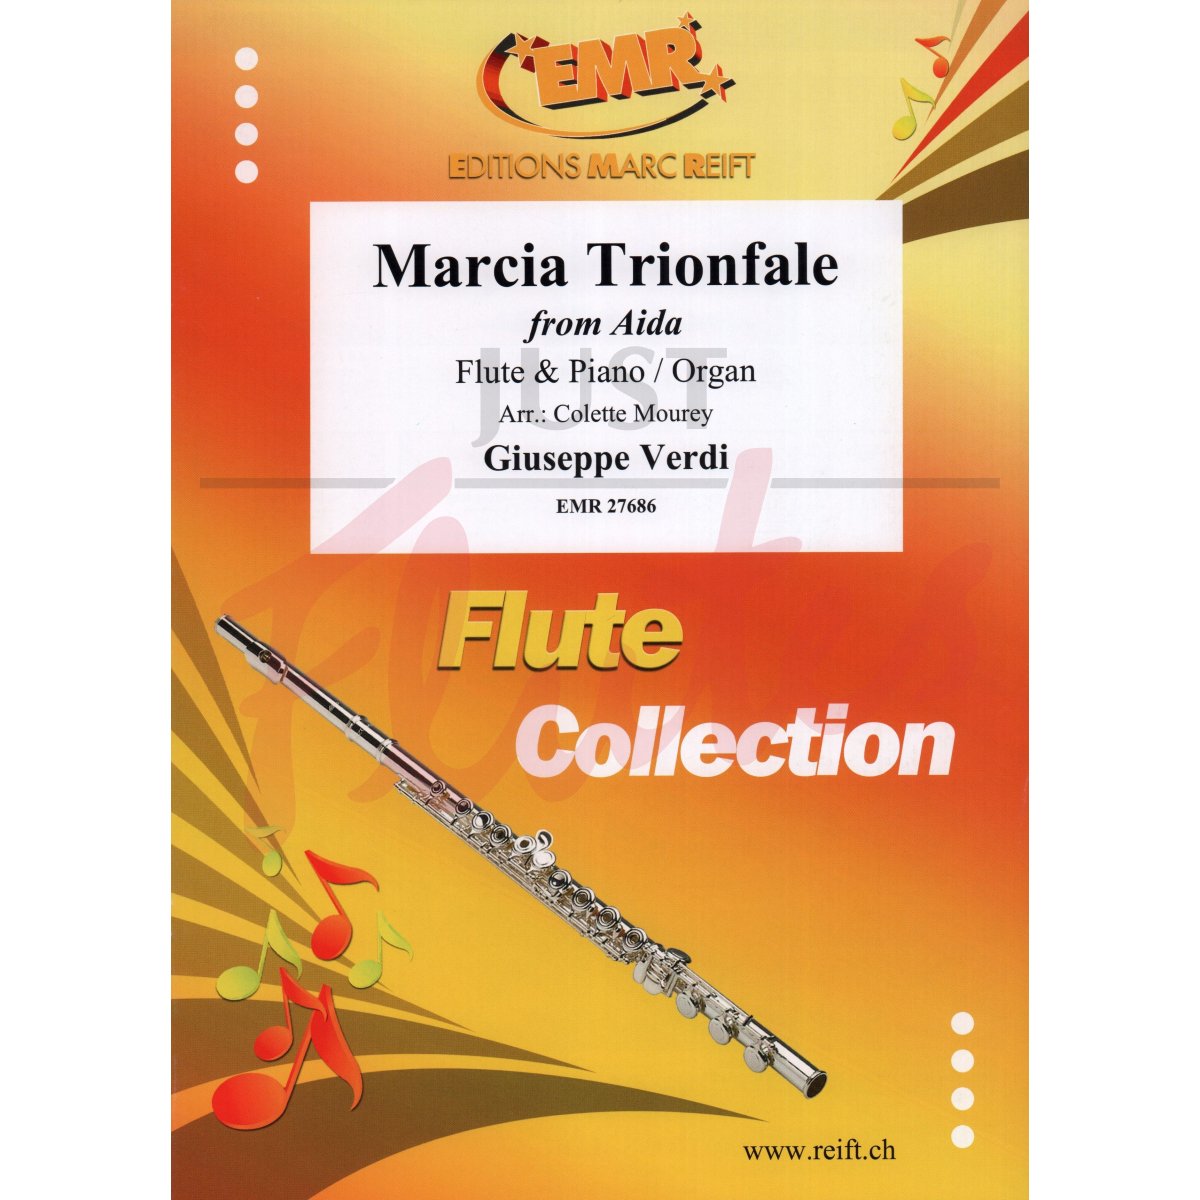 Marcia Trionfale (Triumphant March) from Aida for Flute and Piano/Organ